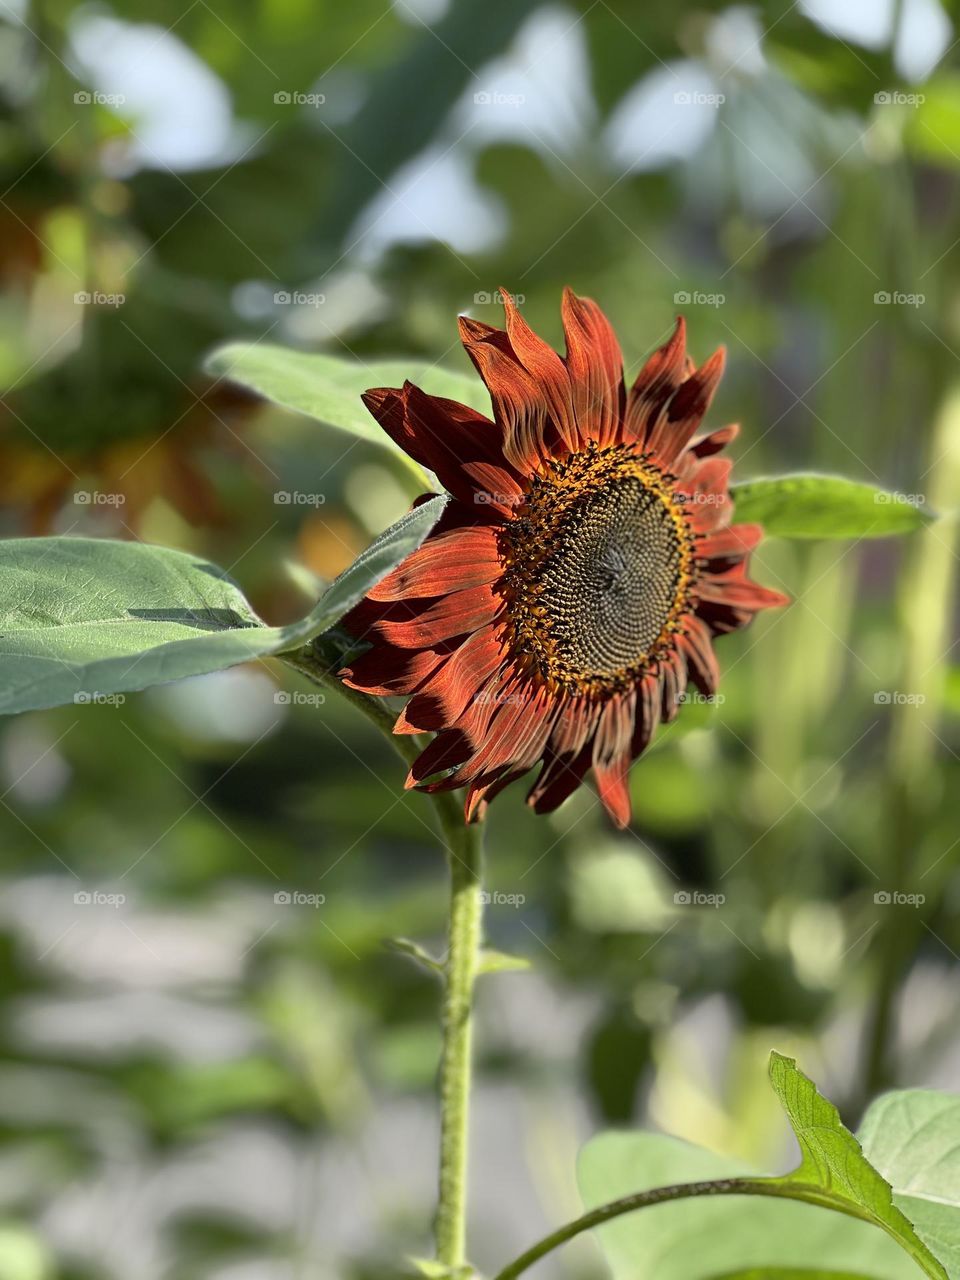 Rusty, red, orange, dramatic sunflower in the late summer breeze. Open and blooming. Full-grown.